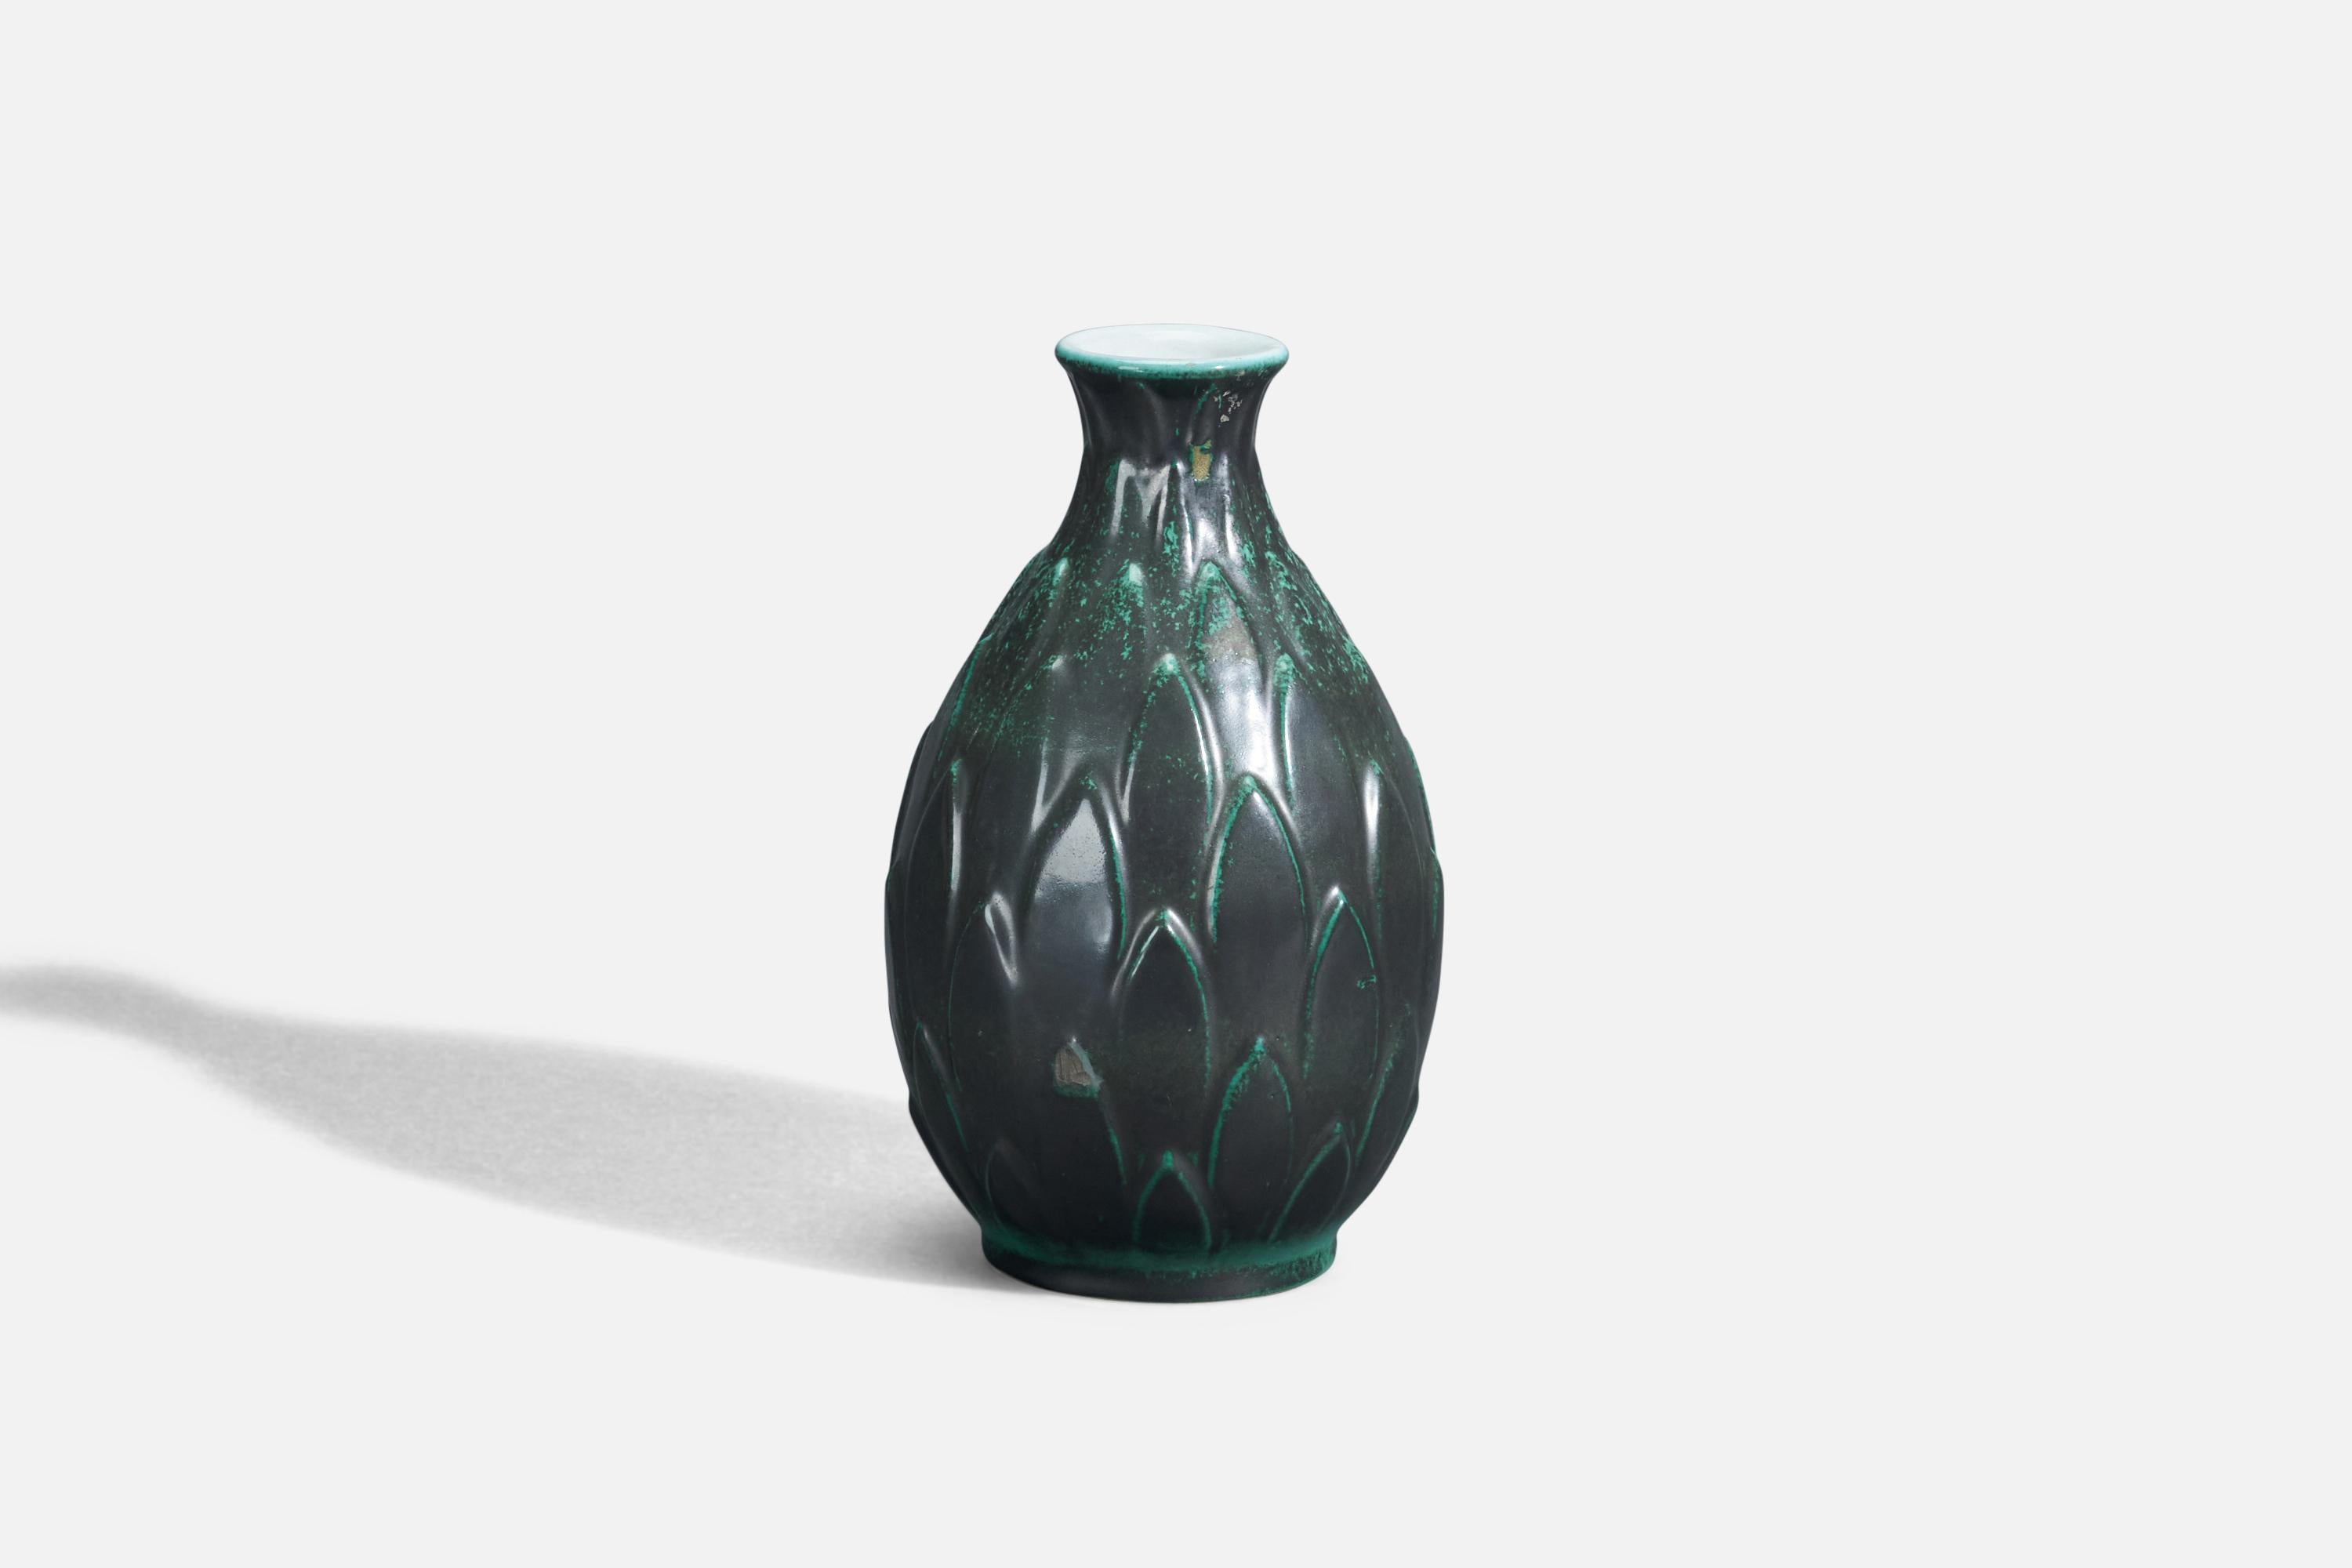 A green glazed stoneware vase designed and produced by Michael Andersen & Son, Bornholm, Denmark, 1960s.

